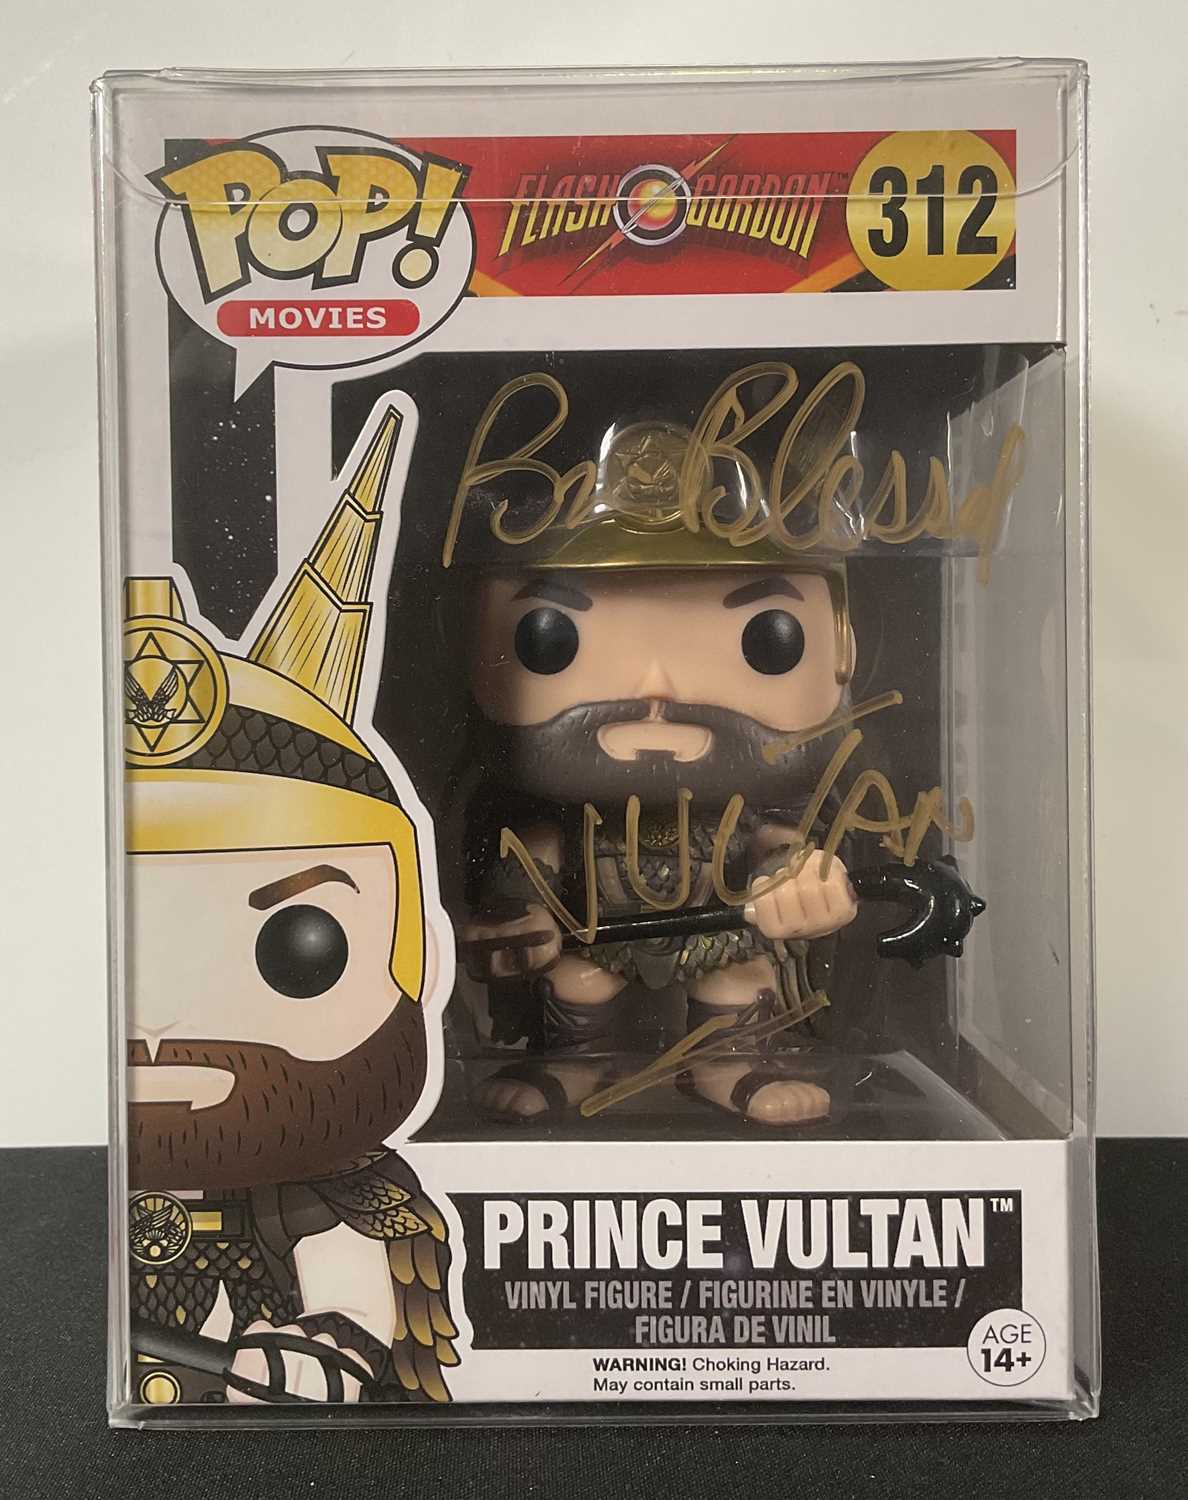 FUNKO POP - Flash Gordon Prince Vulcan funko pop signed by Brian Blessed with character name.